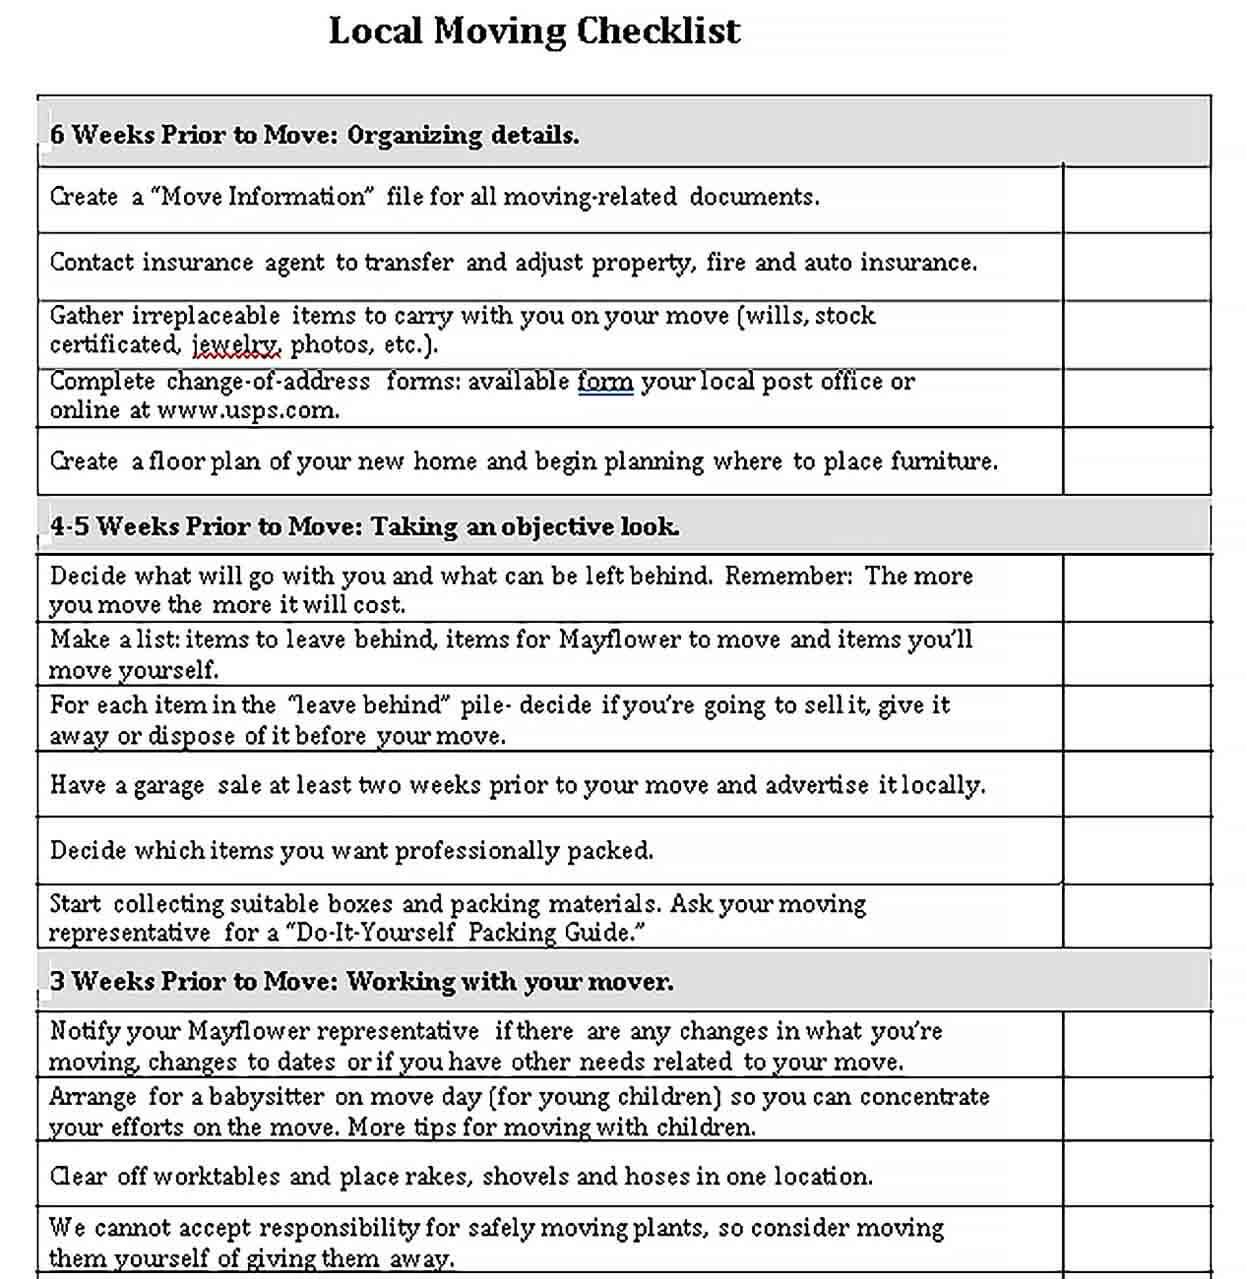 Sample Local Moving Checklist Template